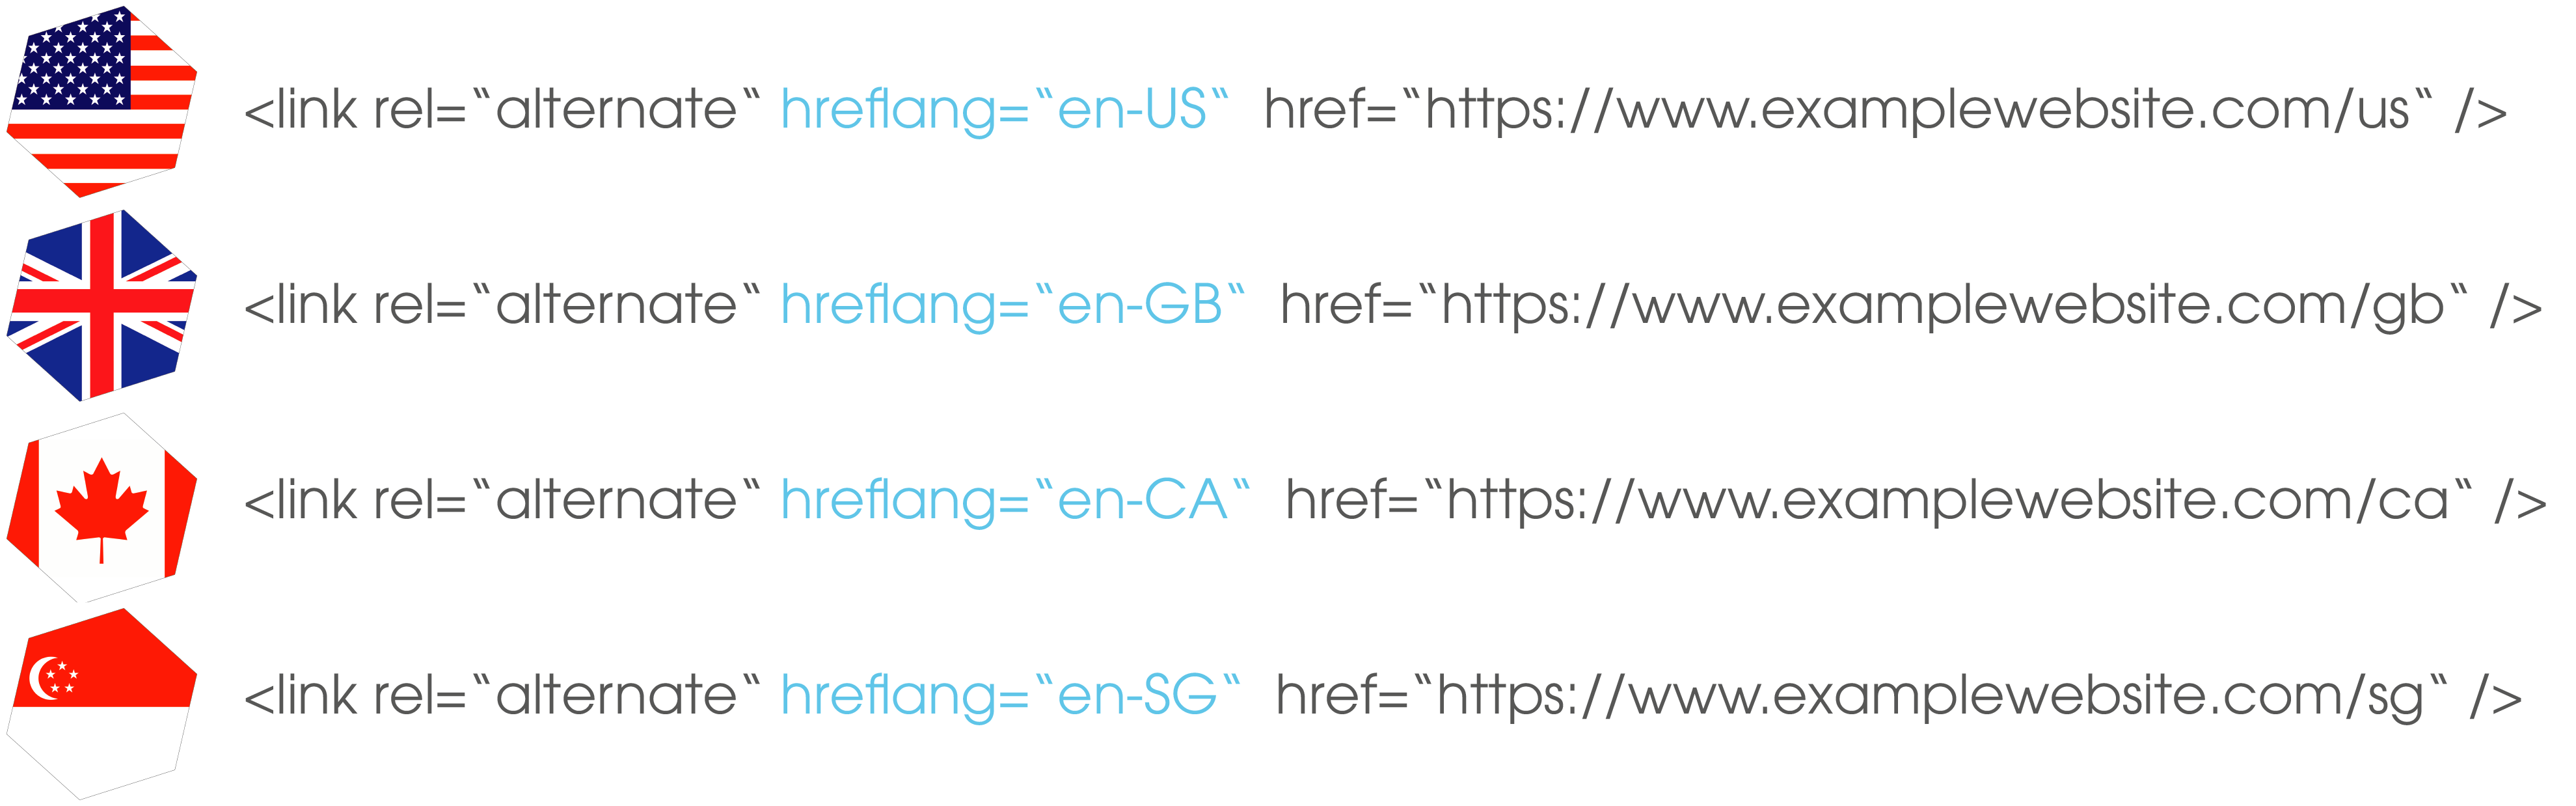 The image shows an example of a website that uses the same language (here English) for different regions (in this case USA, UK, Canada, Singapore).
